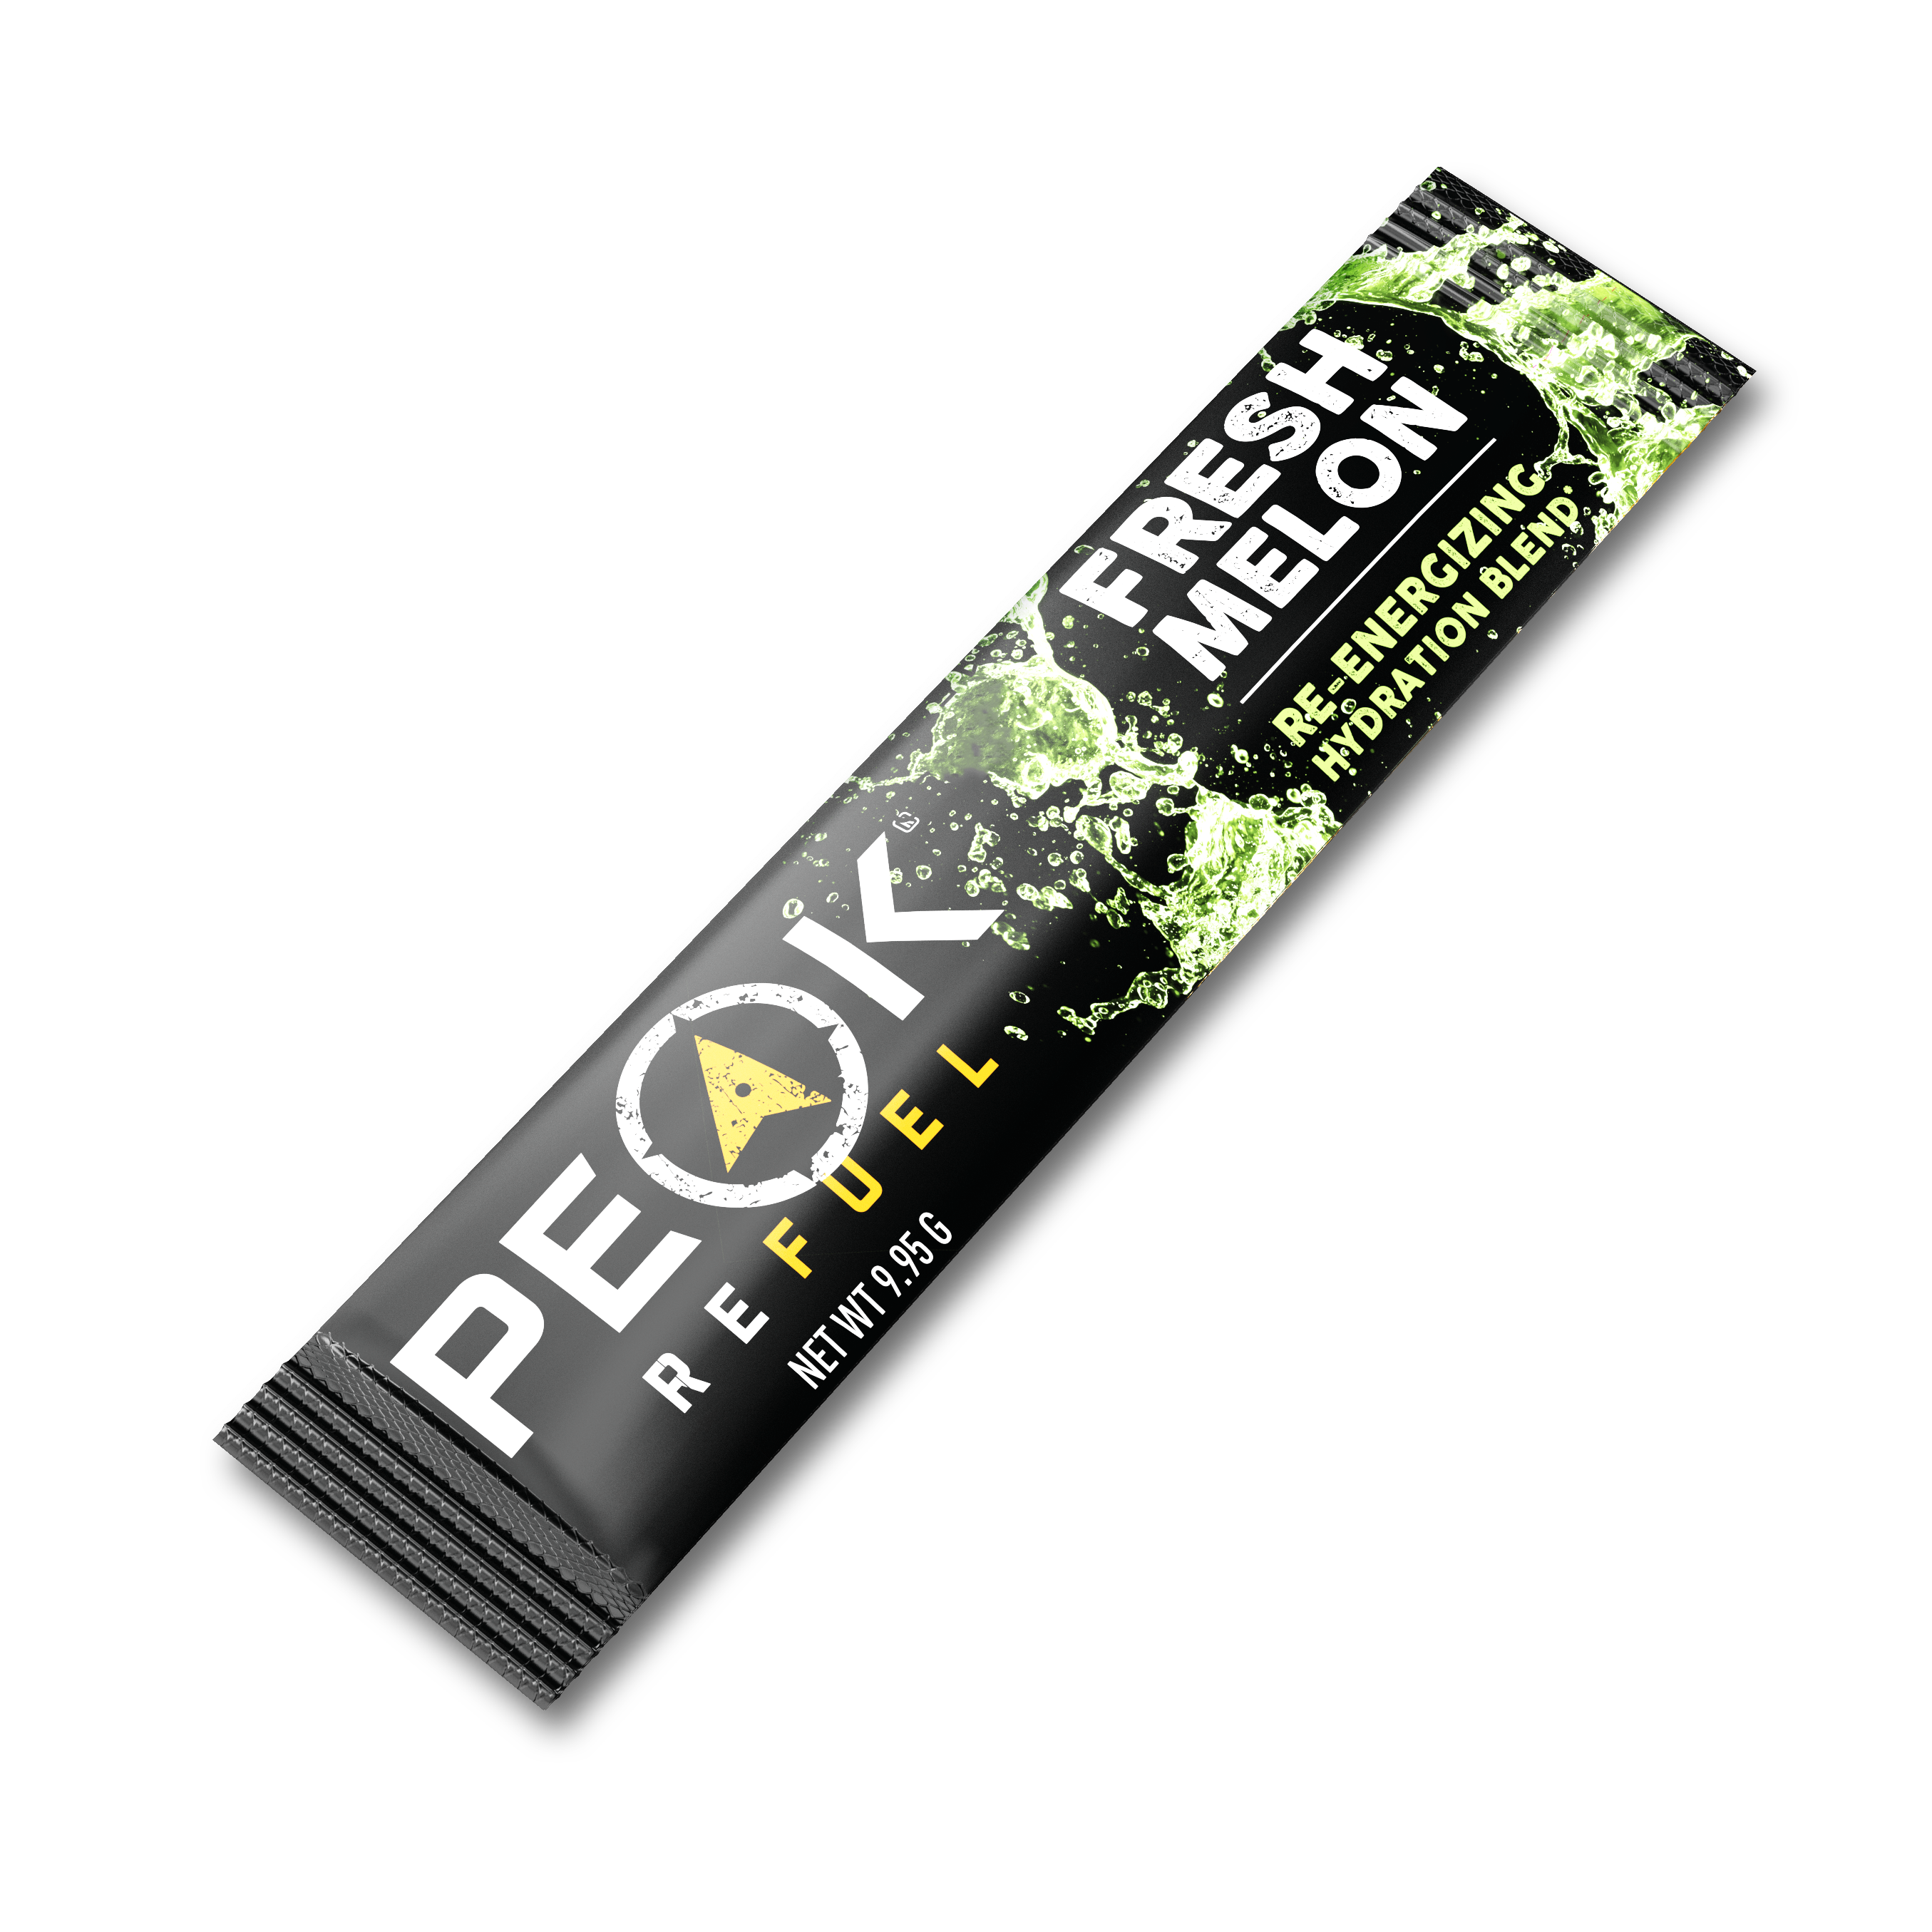 A black and green package with white text and green splashes, ideal for food.